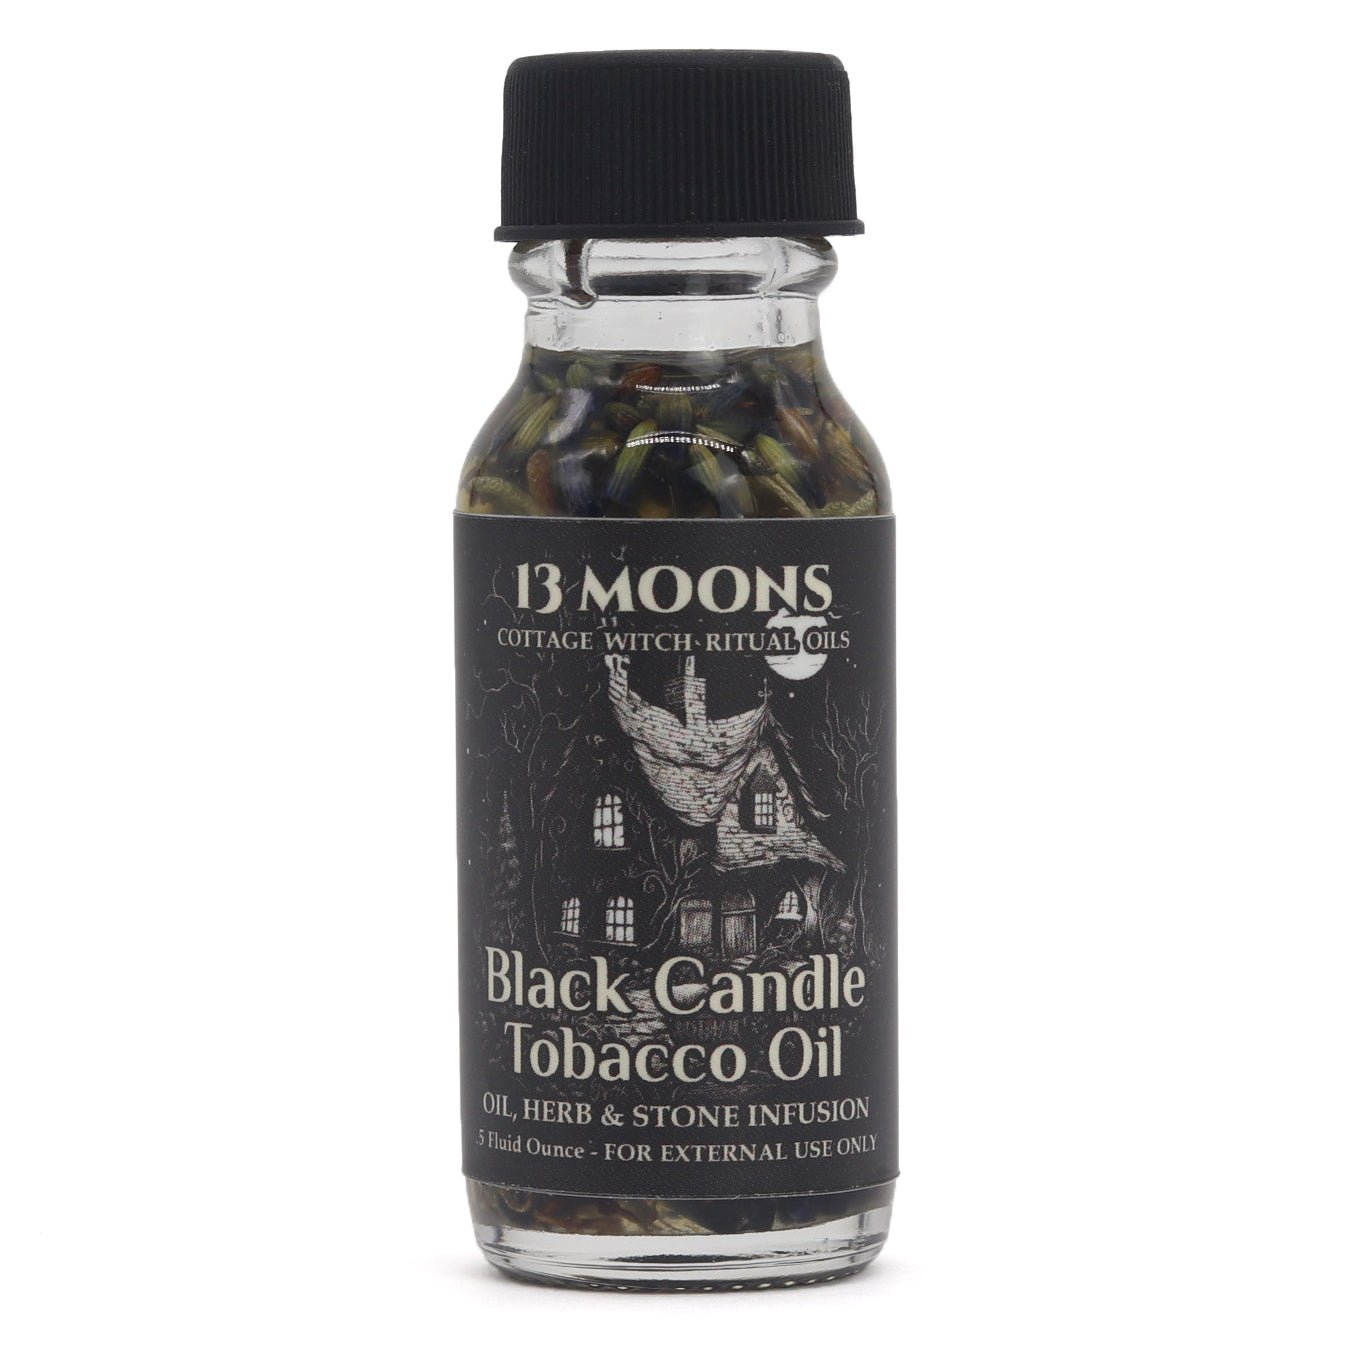 Black Candle Tobacco Ritual Oil by 13 Moons - 13 Moons